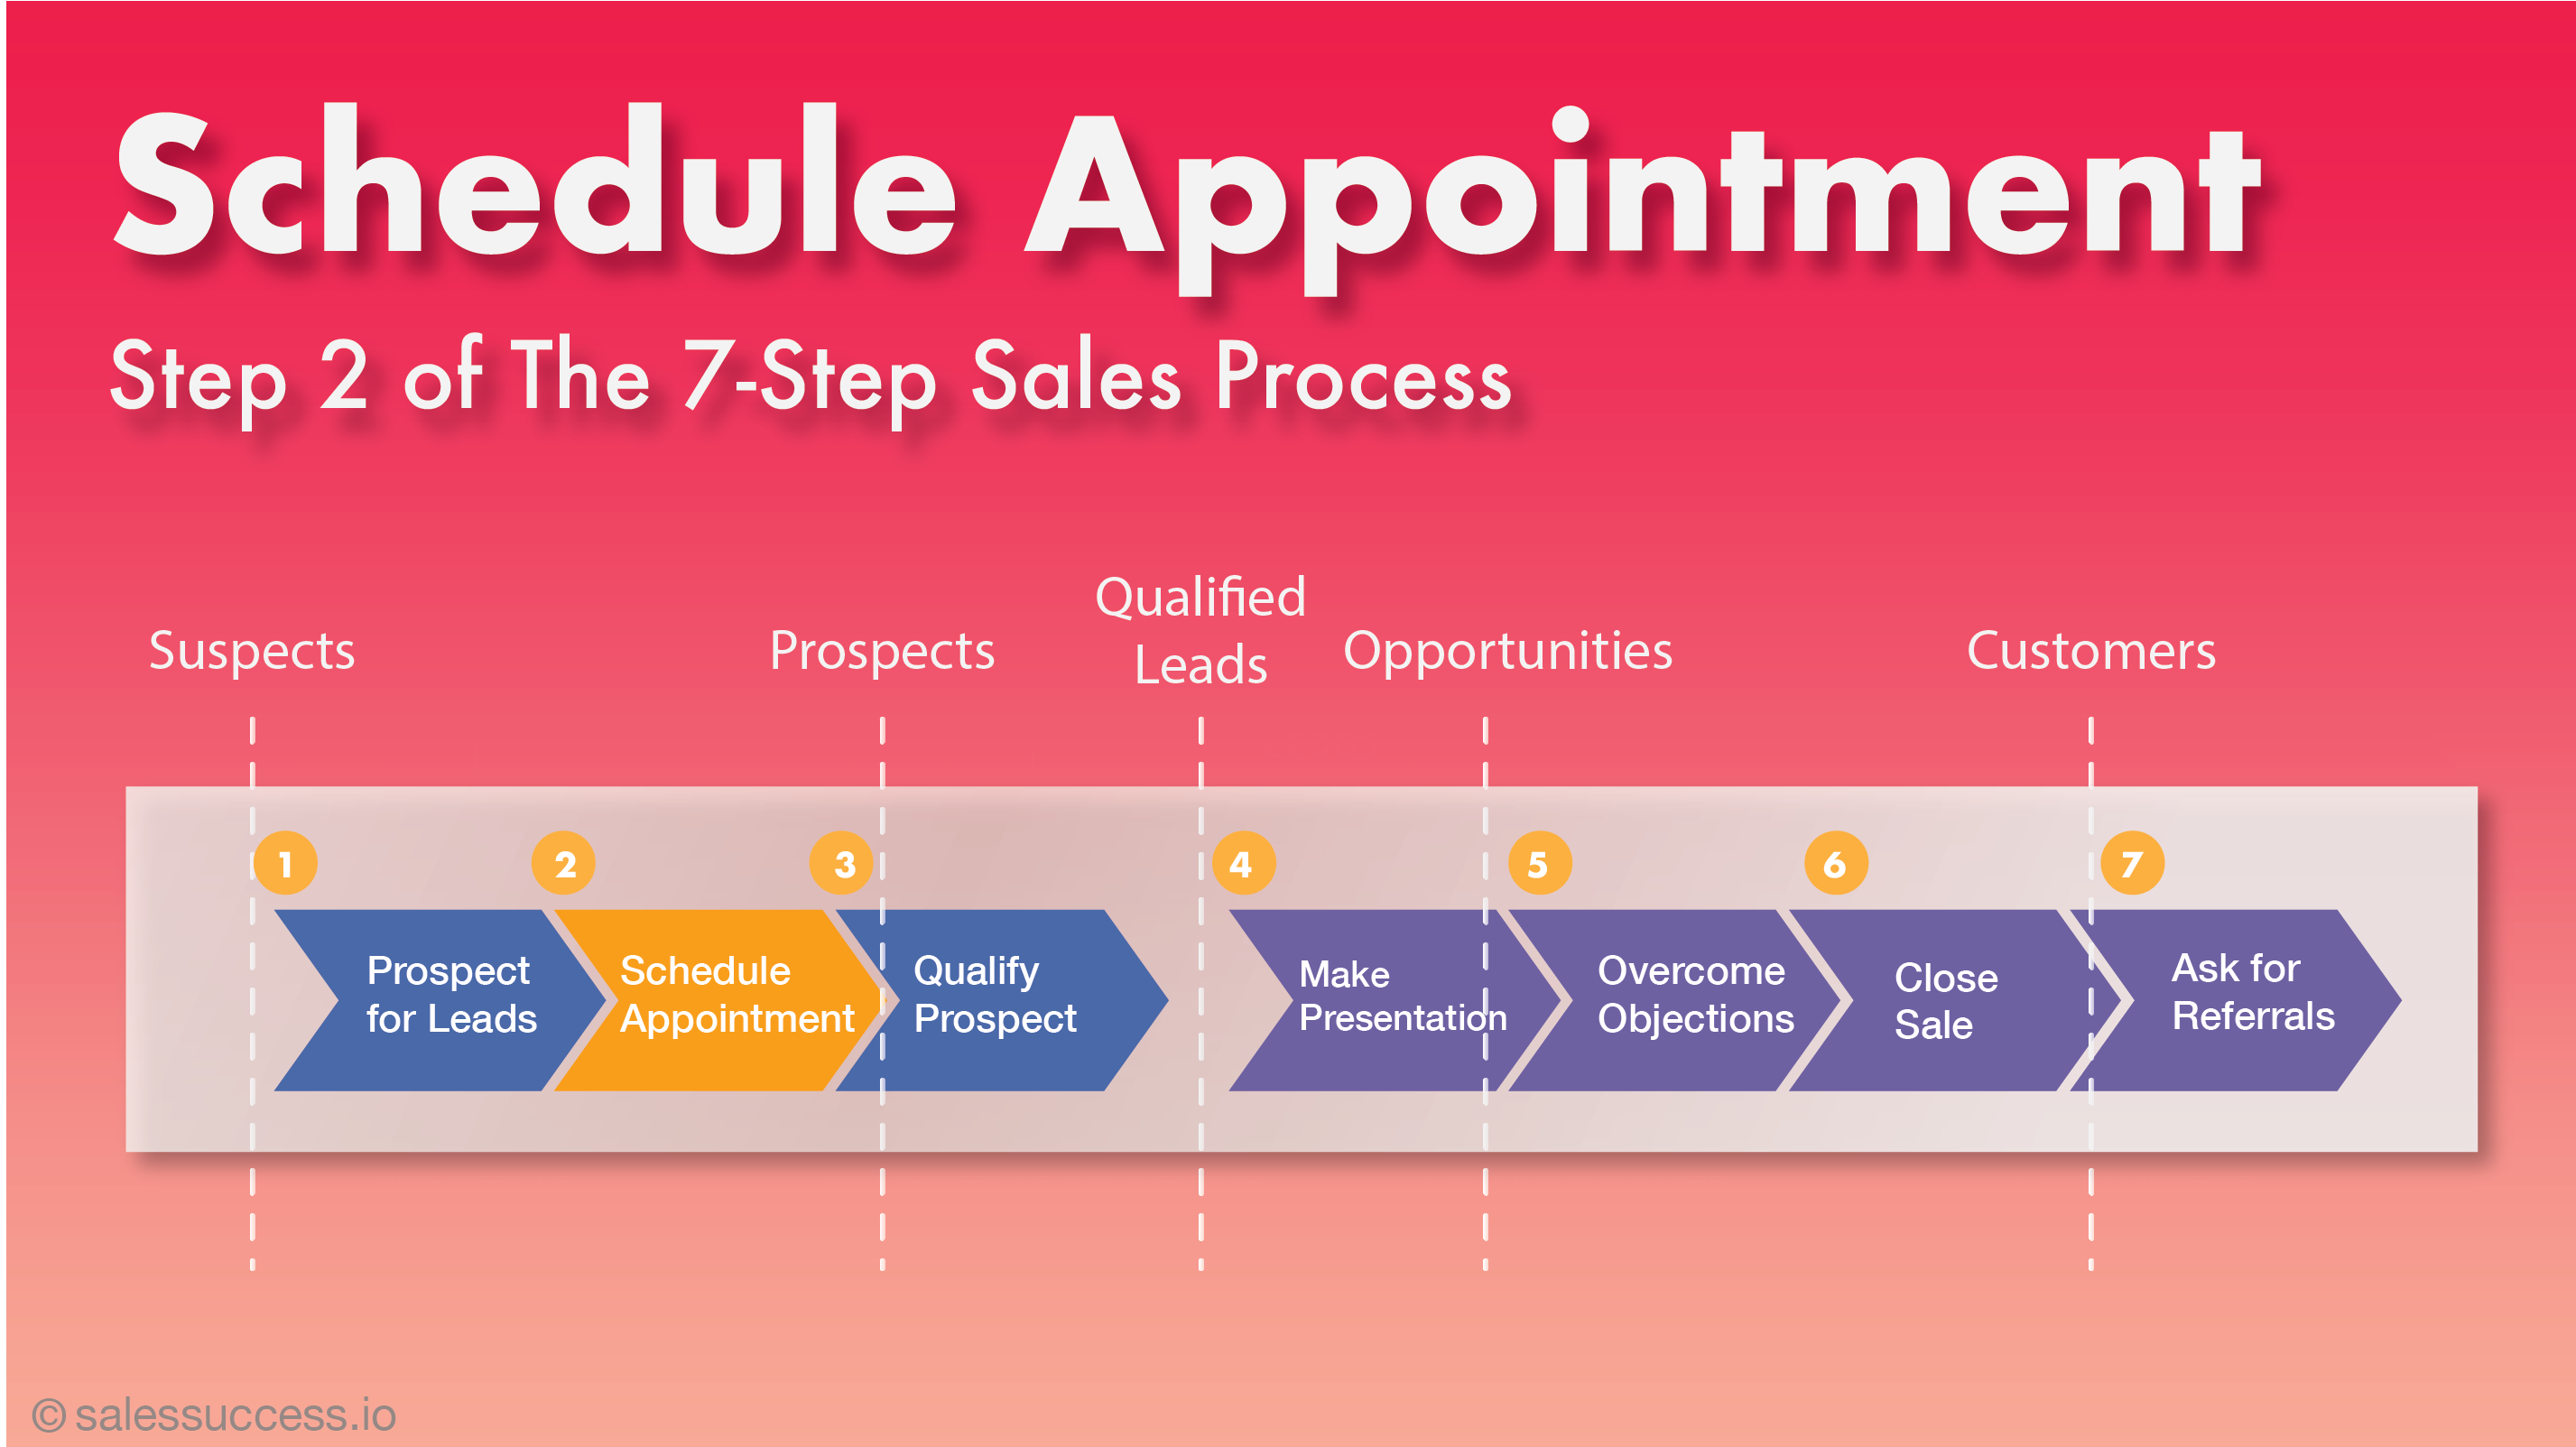 Setting Appointment: Tips and Strategies for Successful Sales Calls